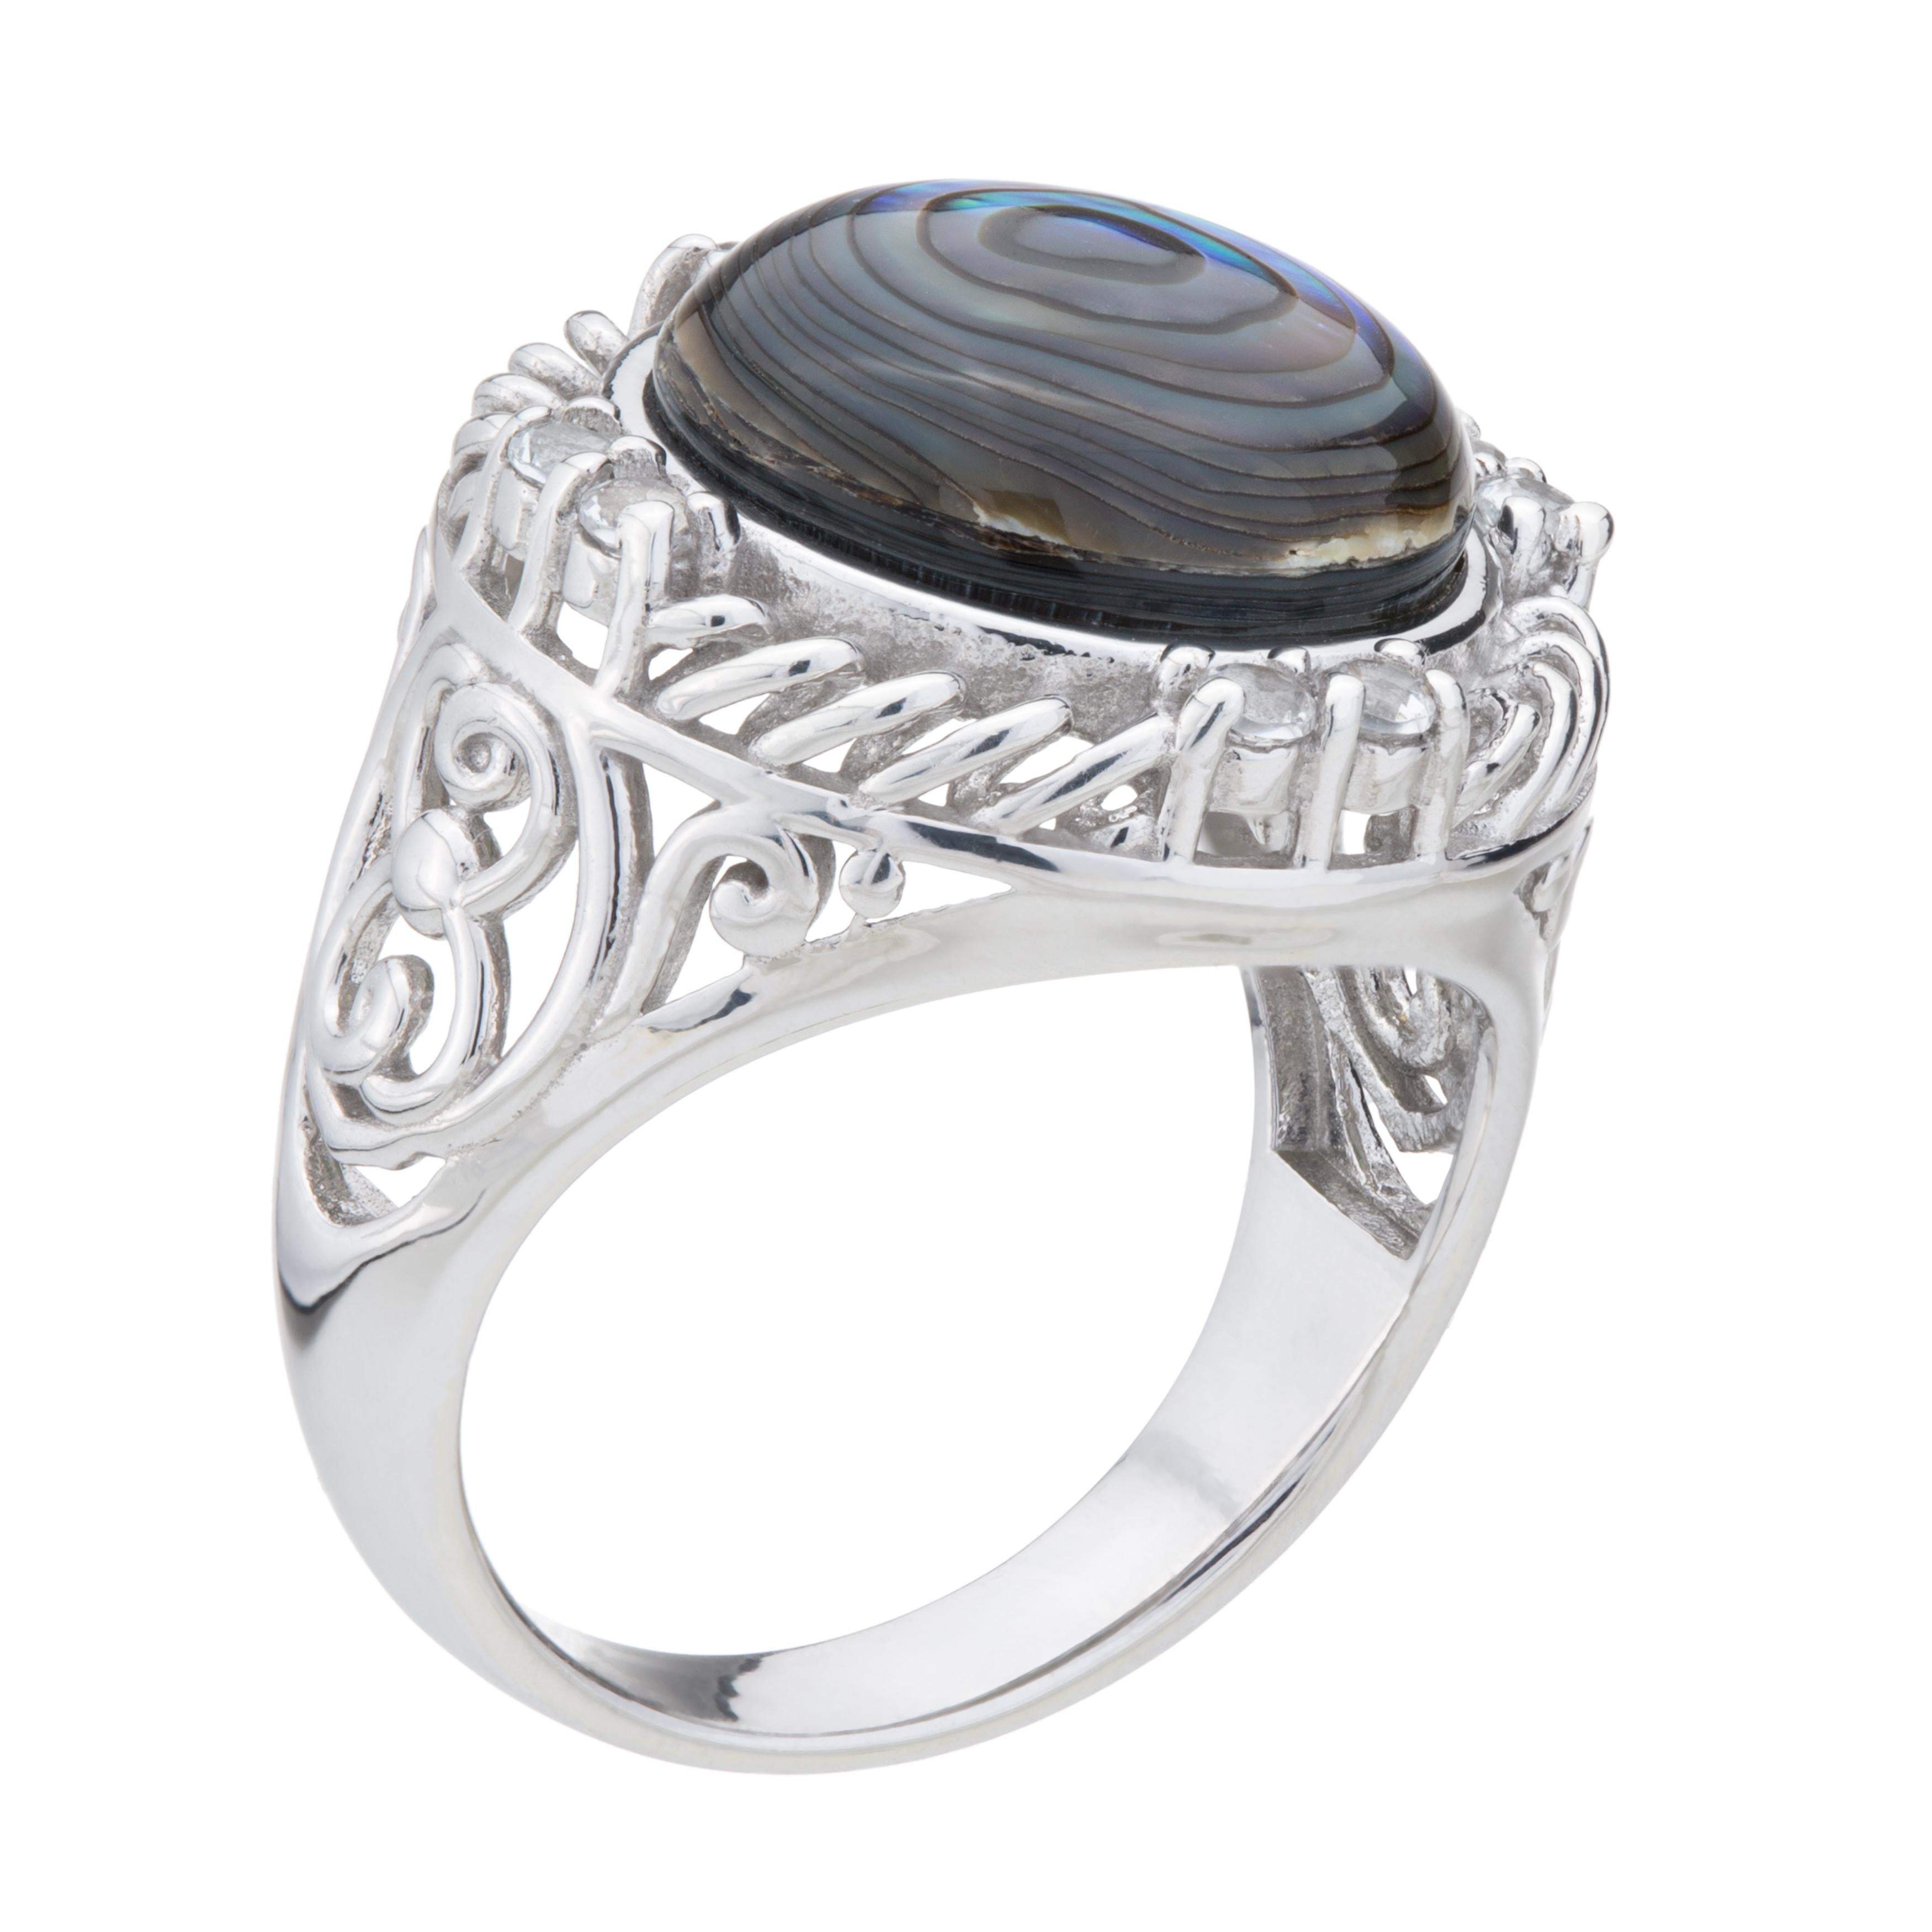 Silver Abalone & White Topaz Textured Ring-Size 9 - Shop Thrifty Treasures